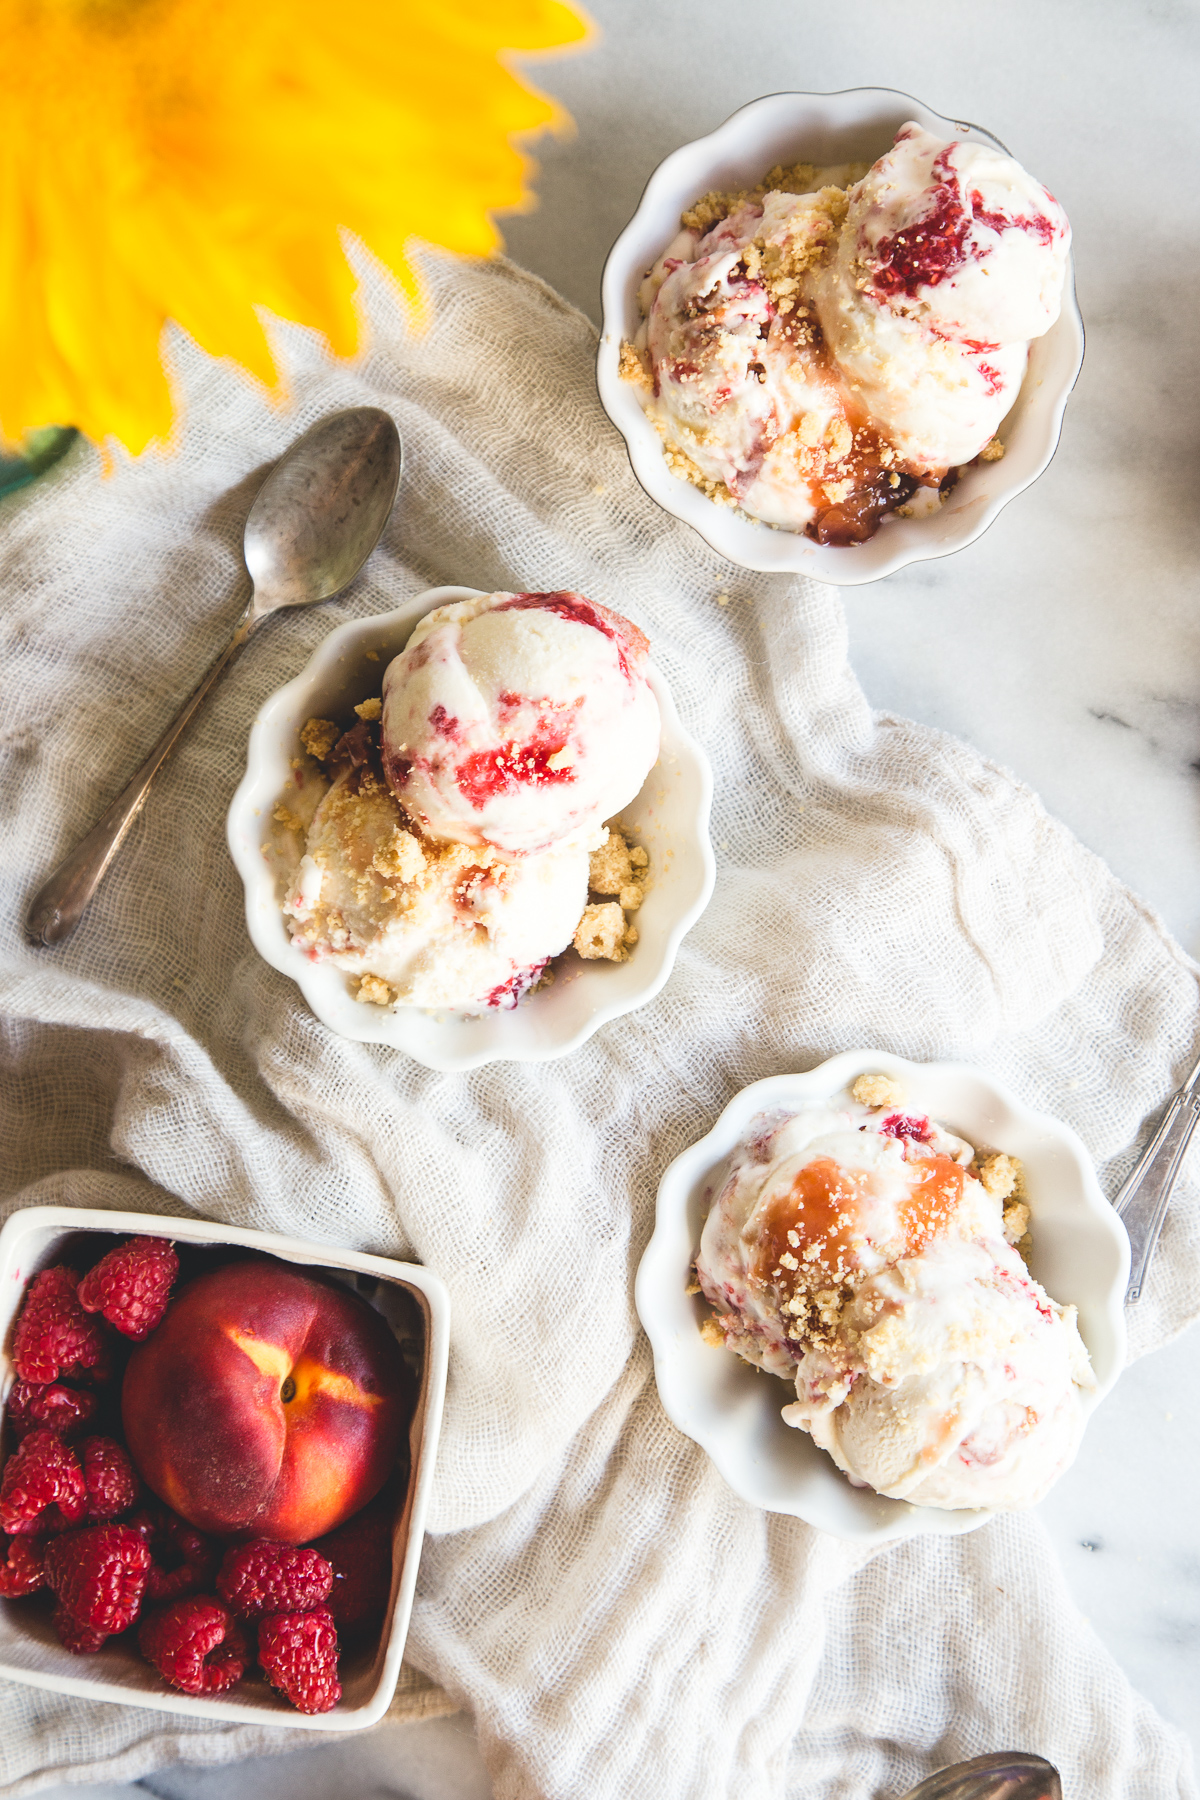 Peachberry shortbread ice cream from Camille Styles